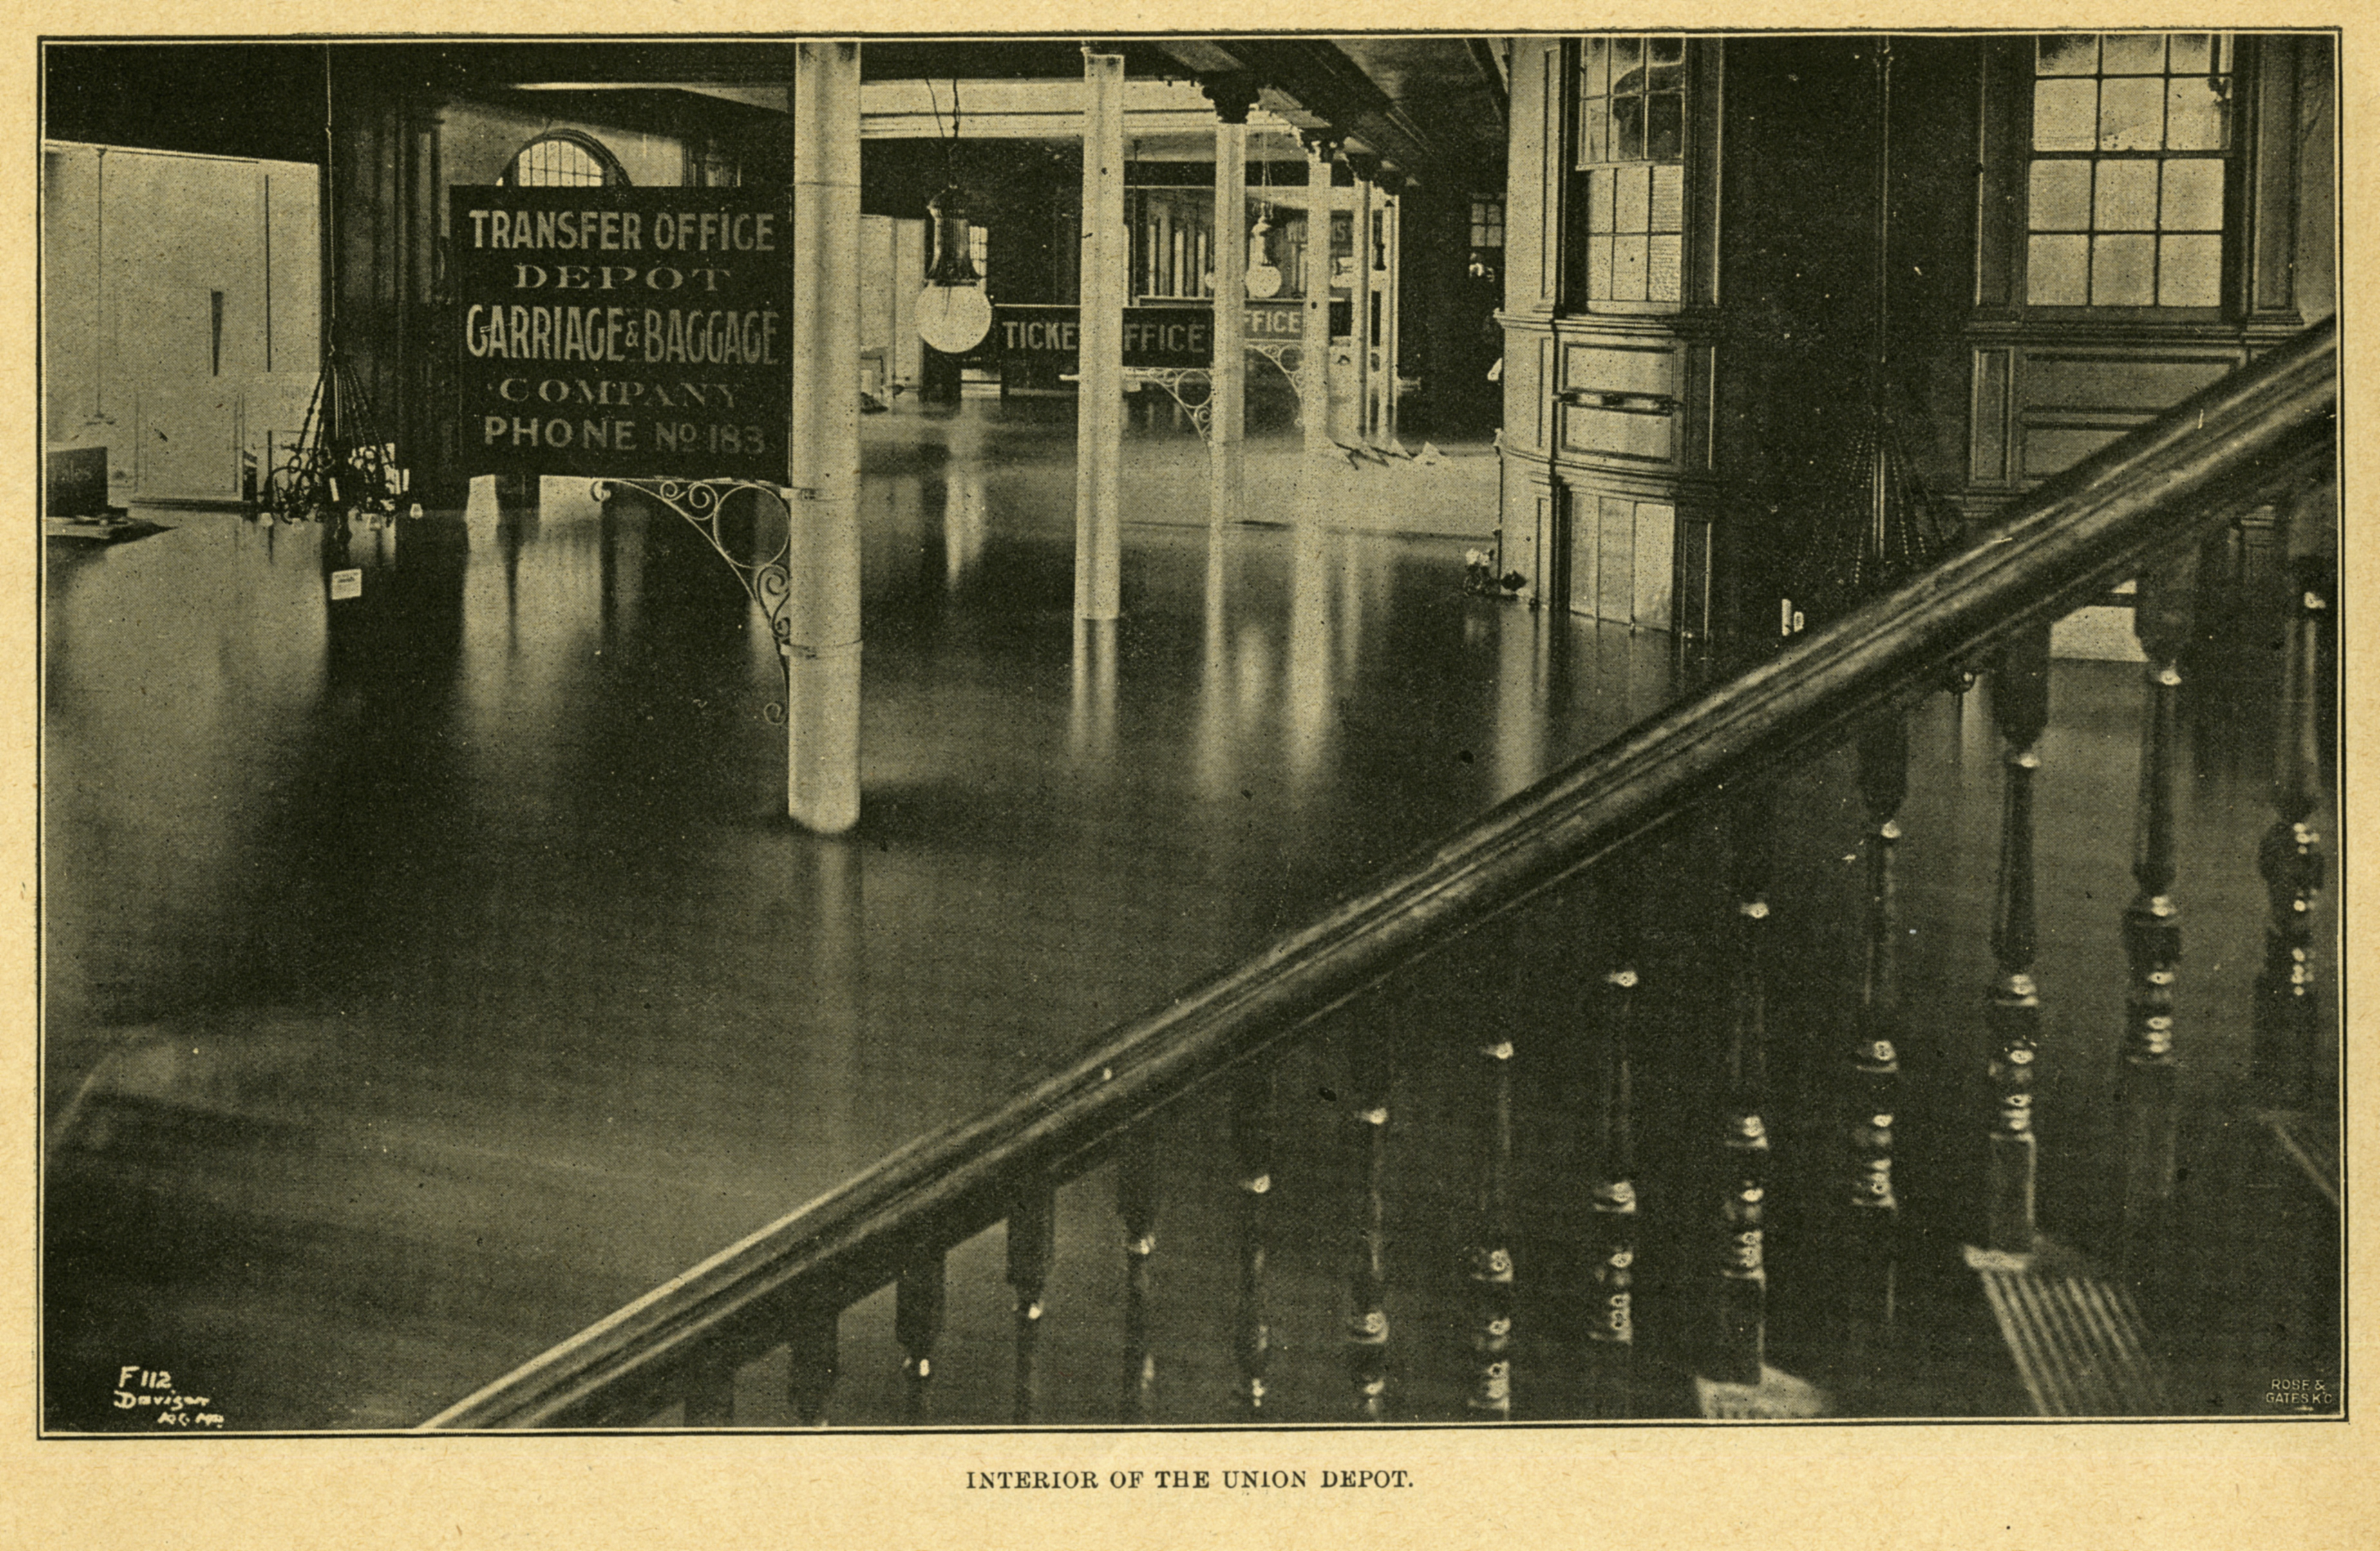 The high-water mark in the depot’s waiting room reached 6 feet 7 inches